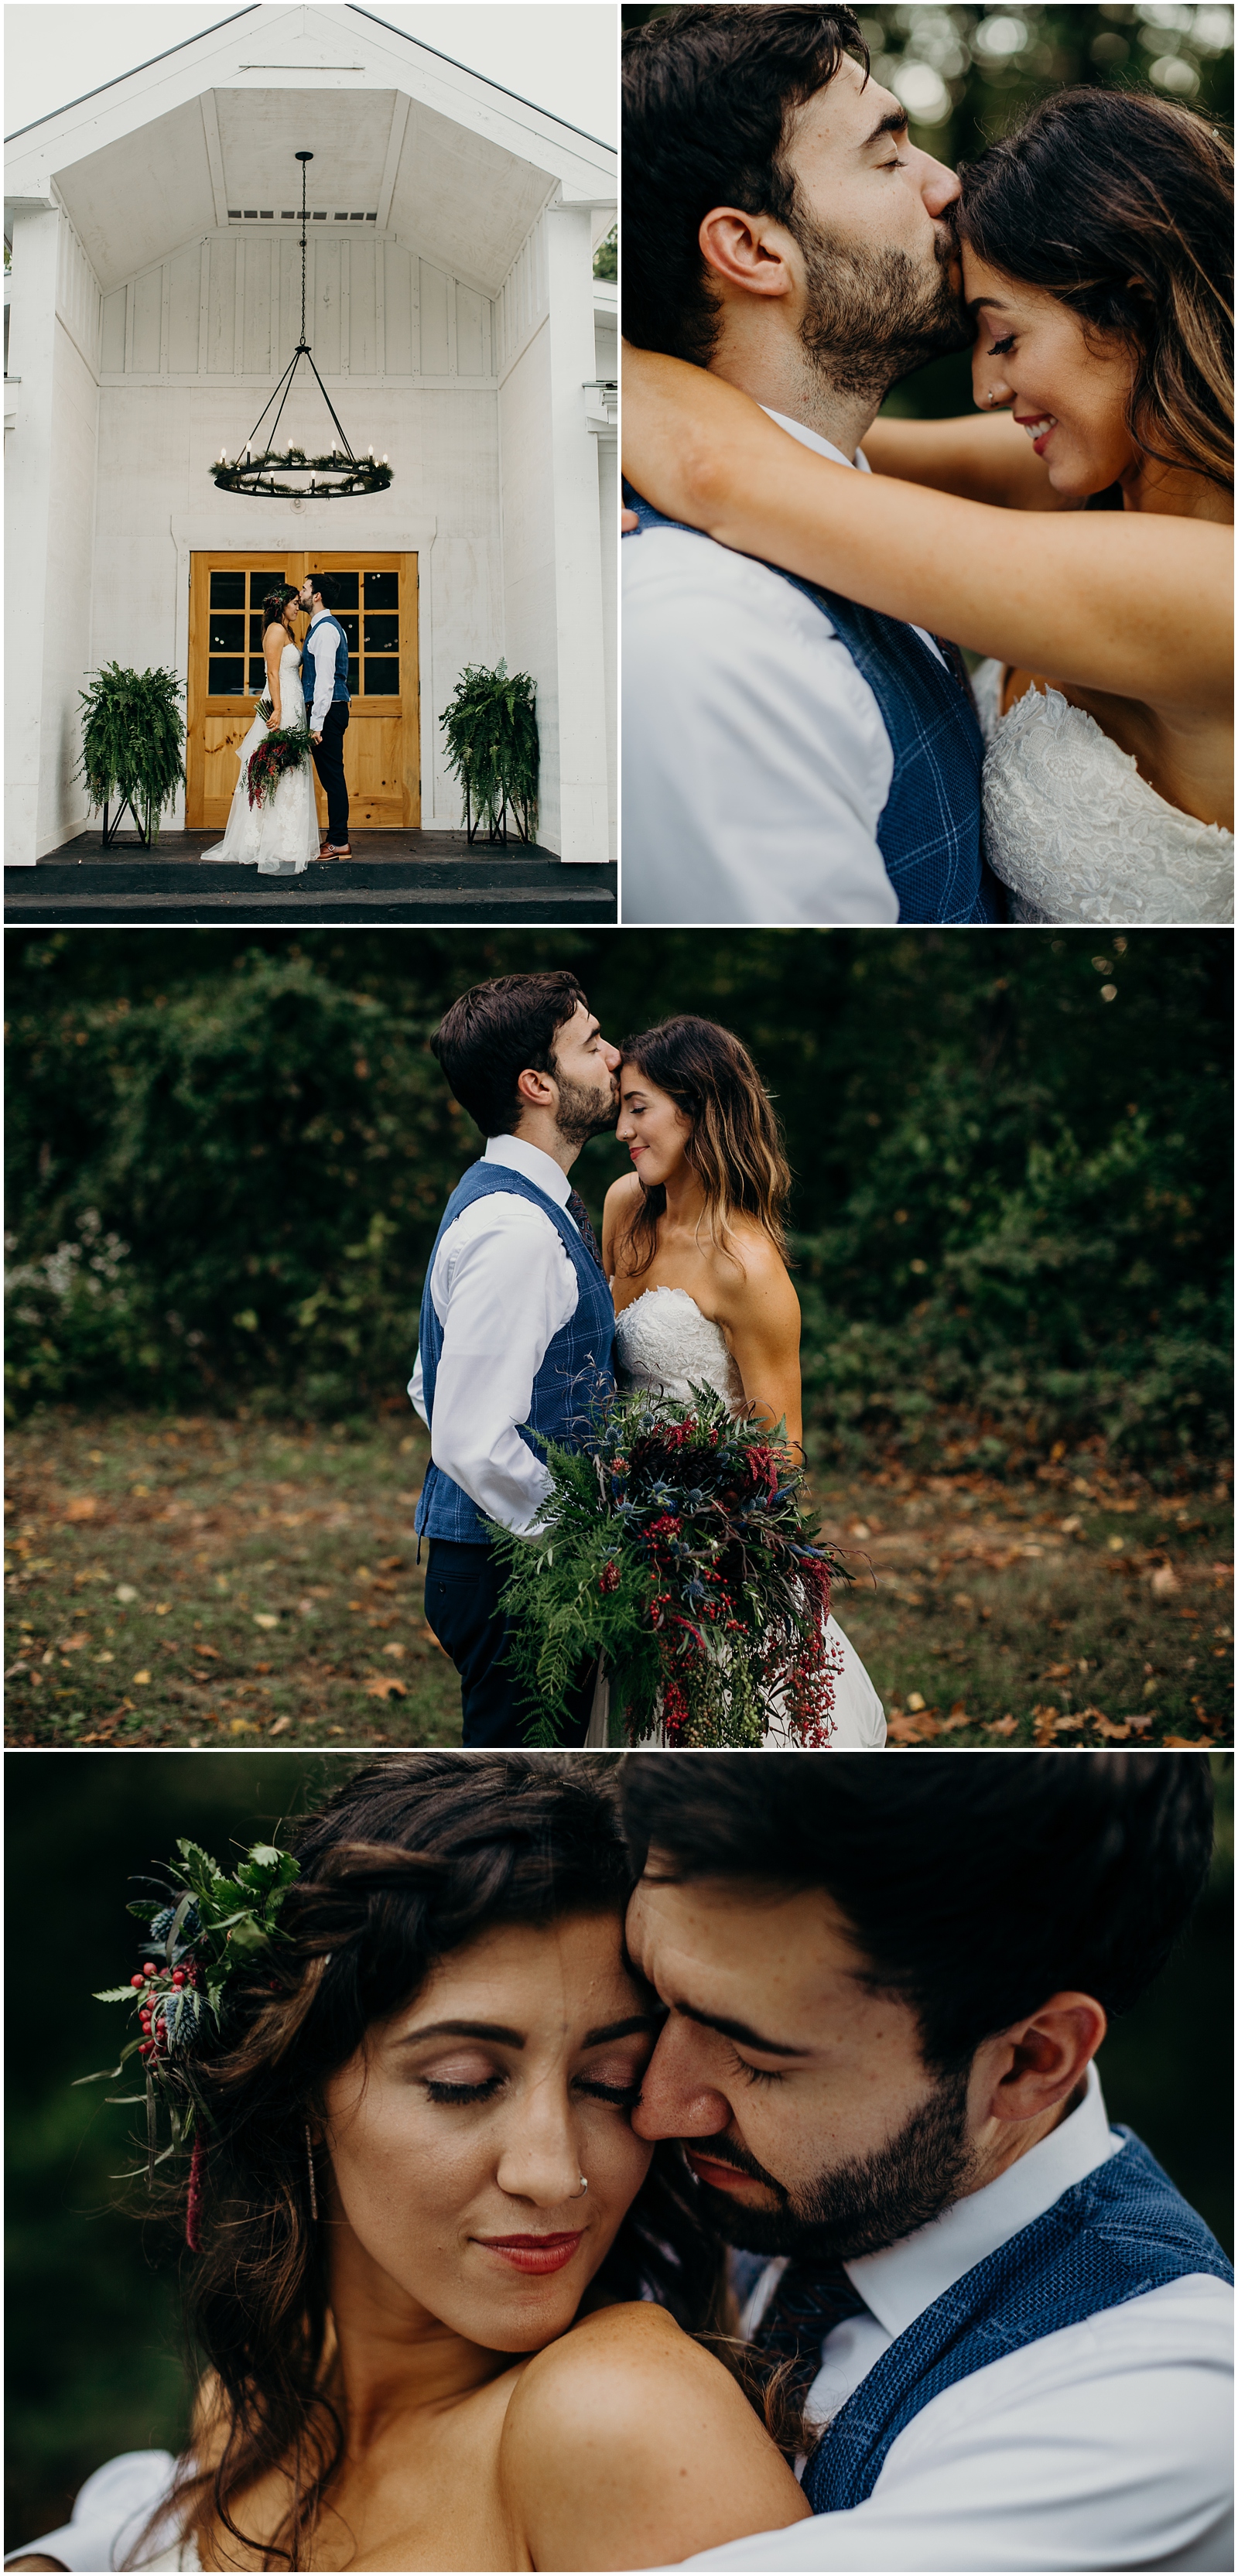 kindred bard, kindred north, Arkansas wedding photographer, scotland wedding photographer, Italy wedding photographer, Arkansas wedding photographer, mismatched bridesmaids dresses, barn wedding, first look, sparkler exit, the Johnsons photo, the Johnsons, Maine wedding photographer 